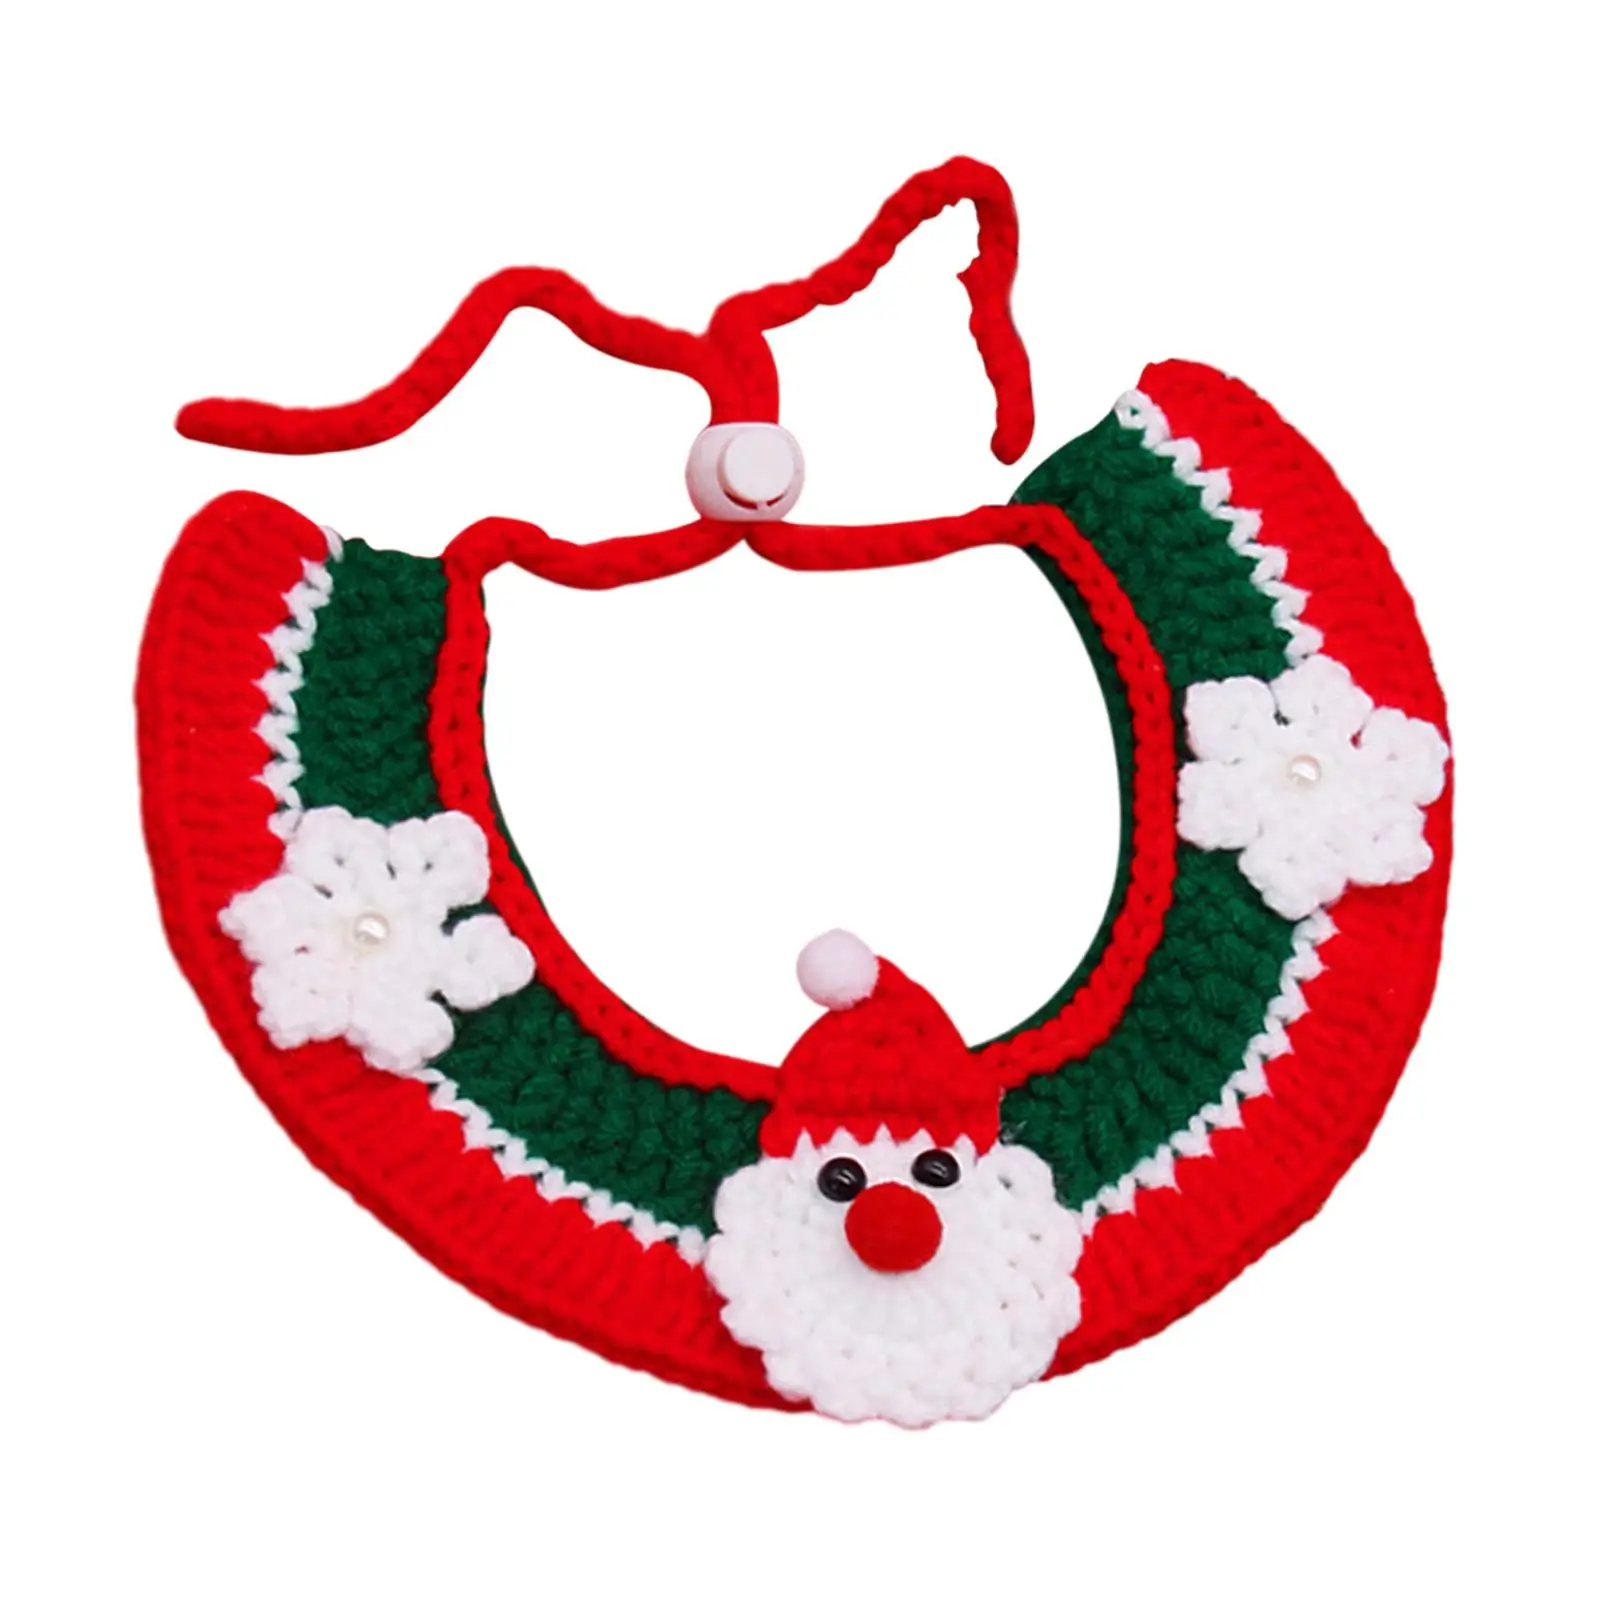 Knitting Cat Collar Holiday Xmas Dress up Cat Christmas Knitted Collar Scarf Kitten Necklace Accessories Hand Woven Crochet Bib